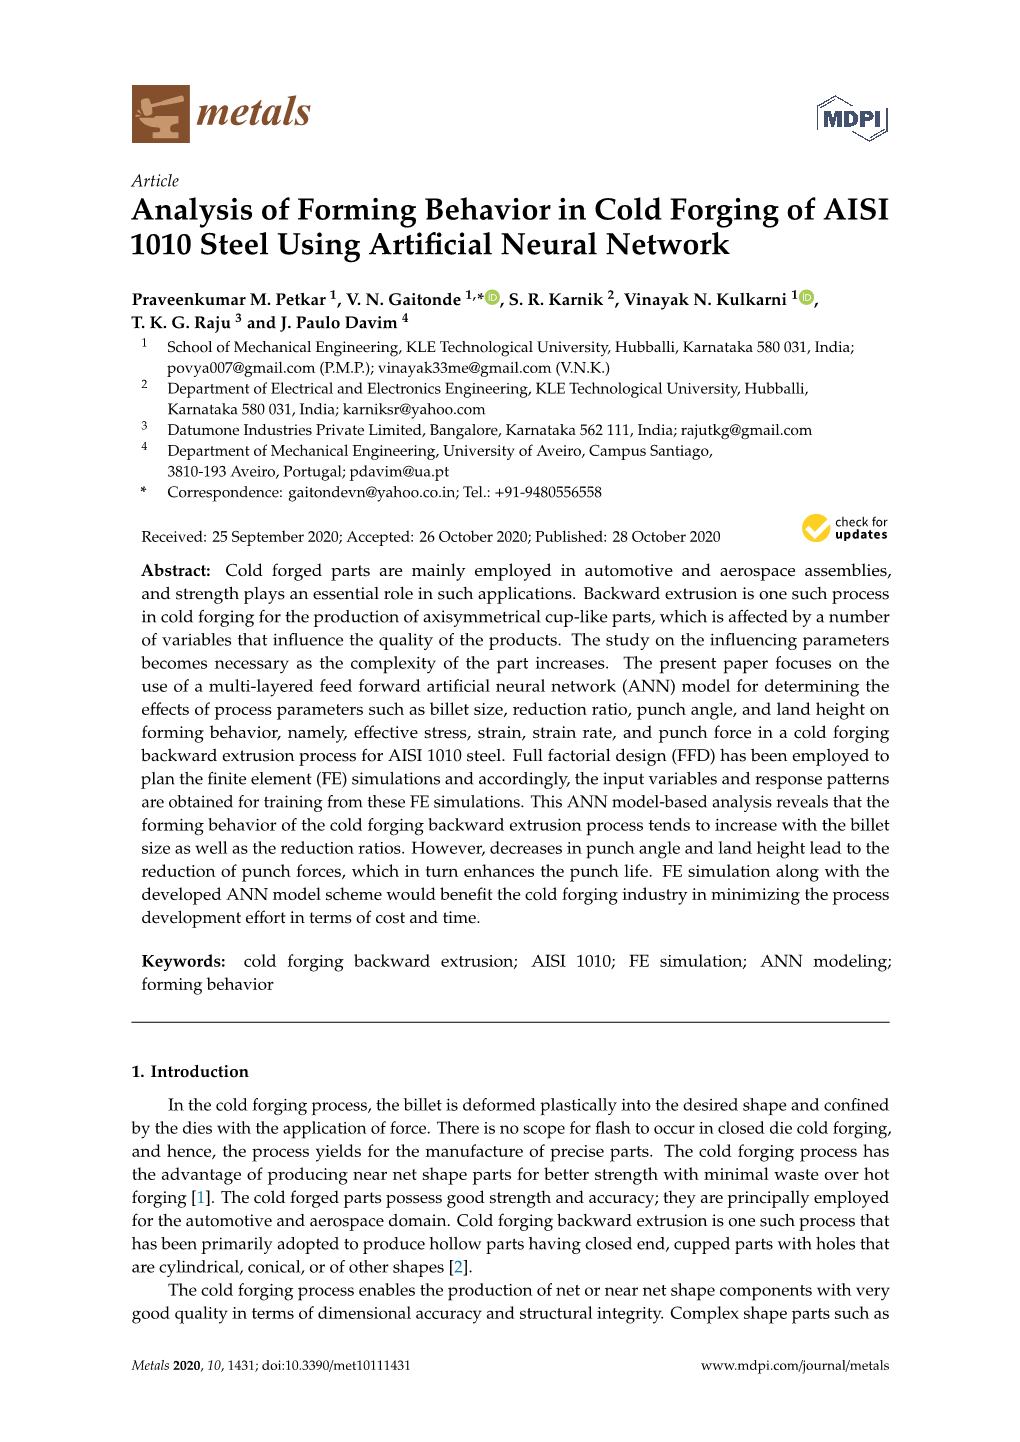 Analysis of Forming Behavior in Cold Forging of AISI 1010 Steel Using Artiﬁcial Neural Network